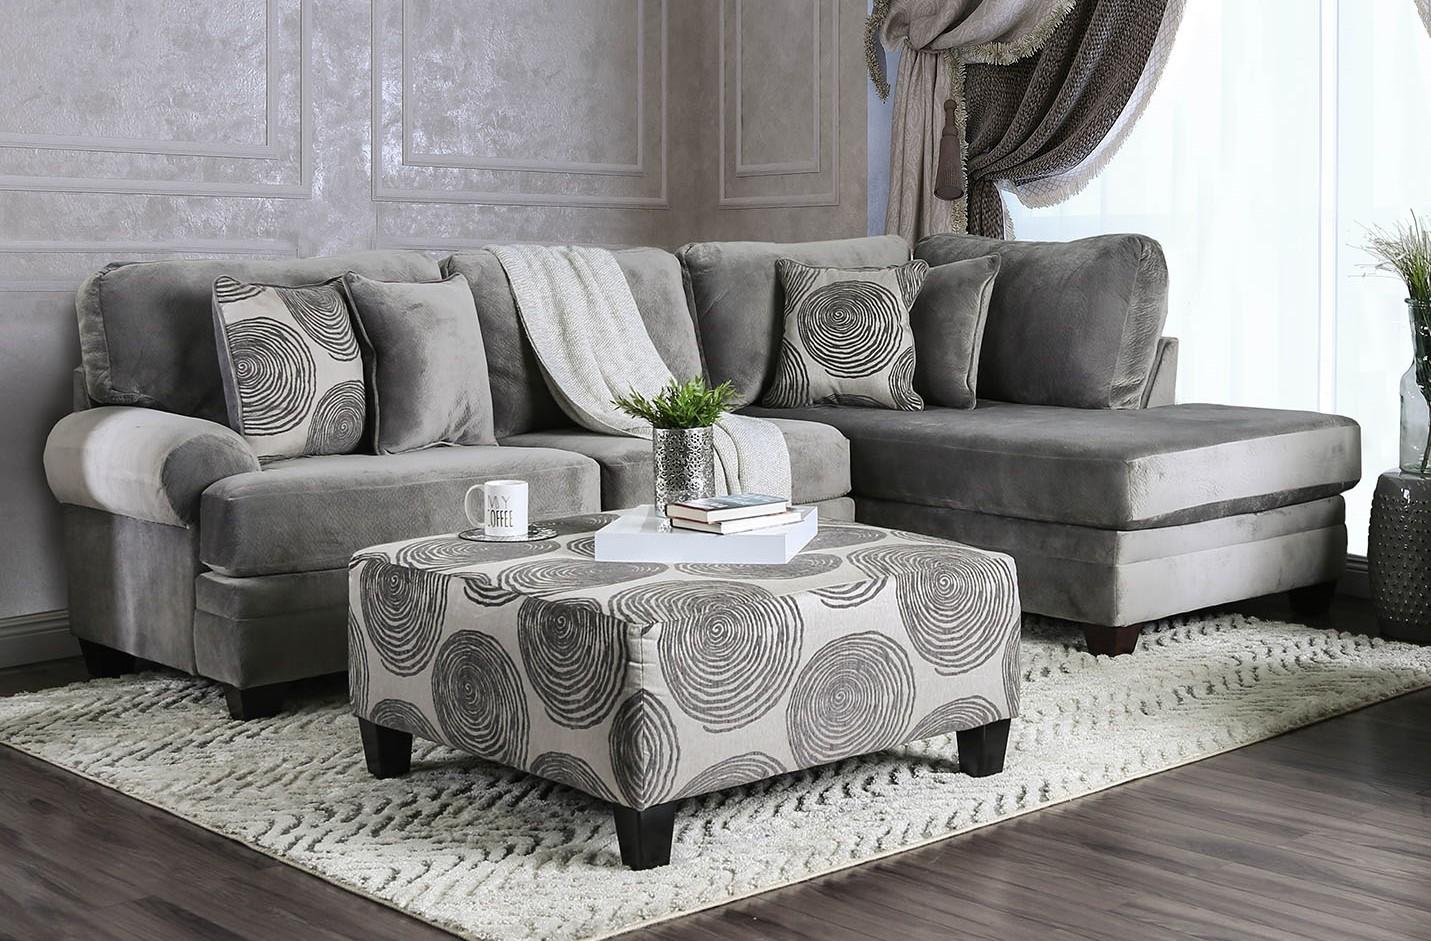 Transitional Sectional Sofa BONAVENTURA SM5143GY SM5143GY in Gray Microfiber